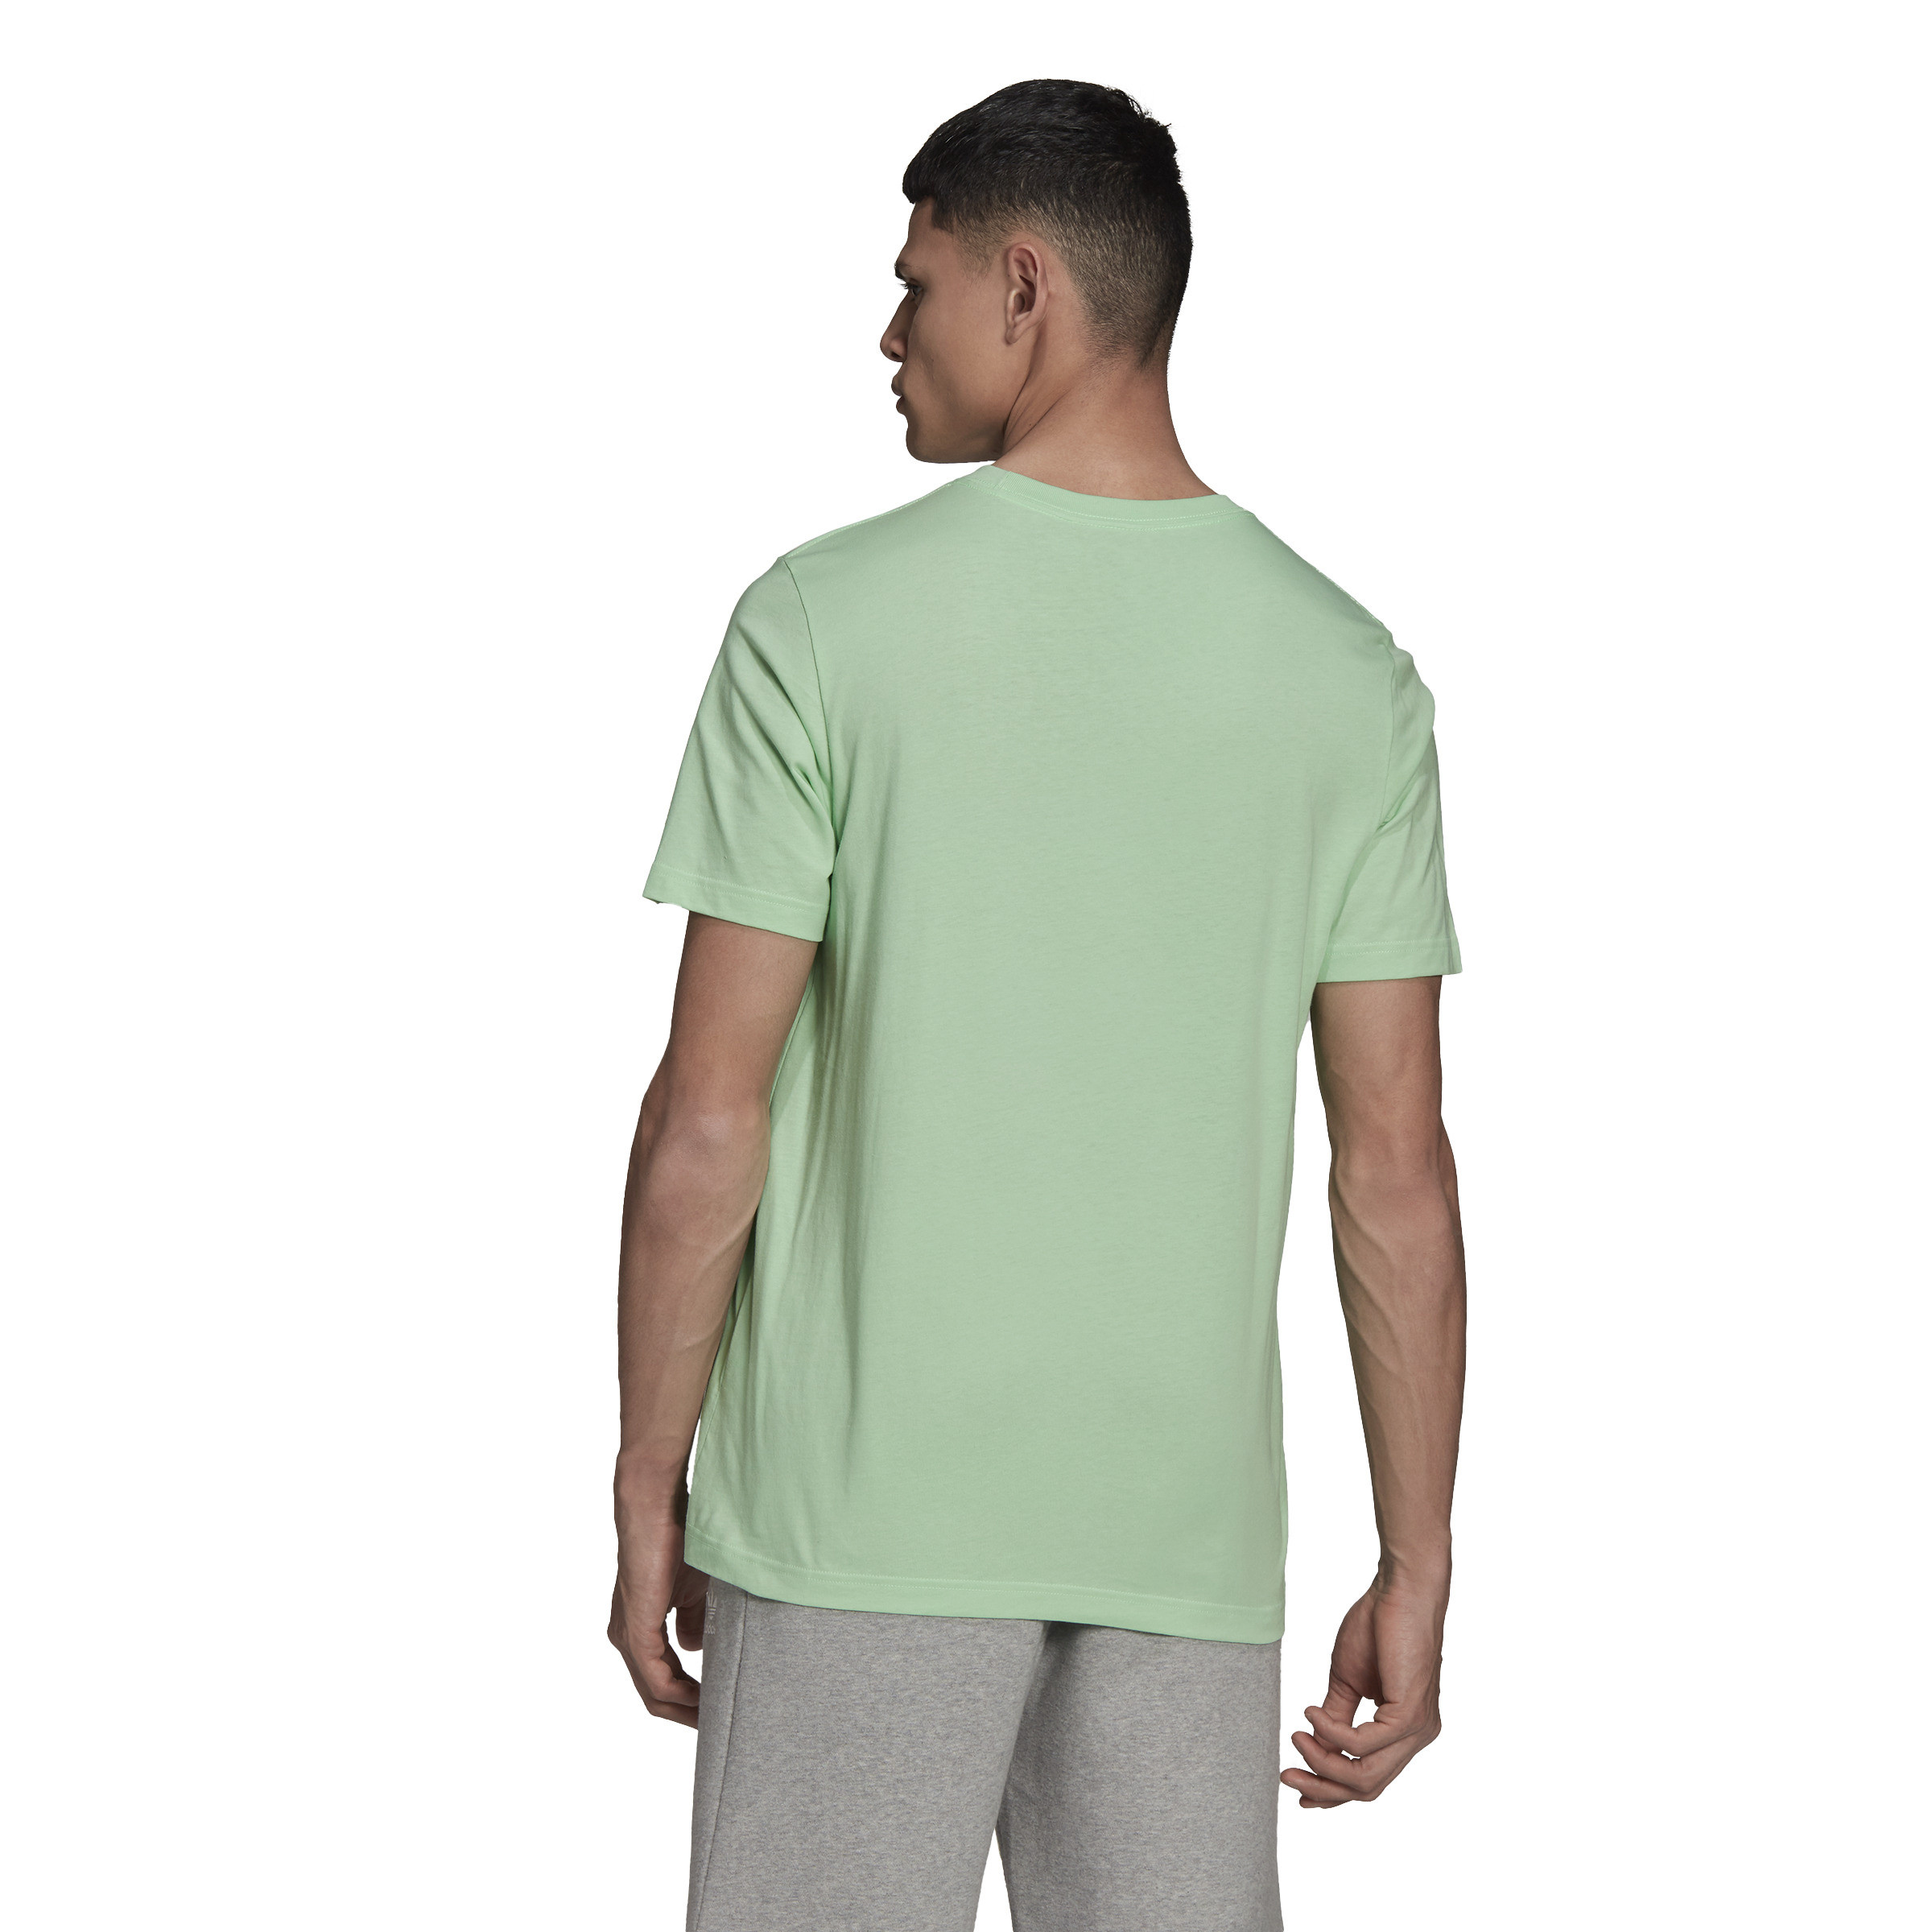 Adidas - Adicolor T-shirt with logo, Light Green, large image number 3